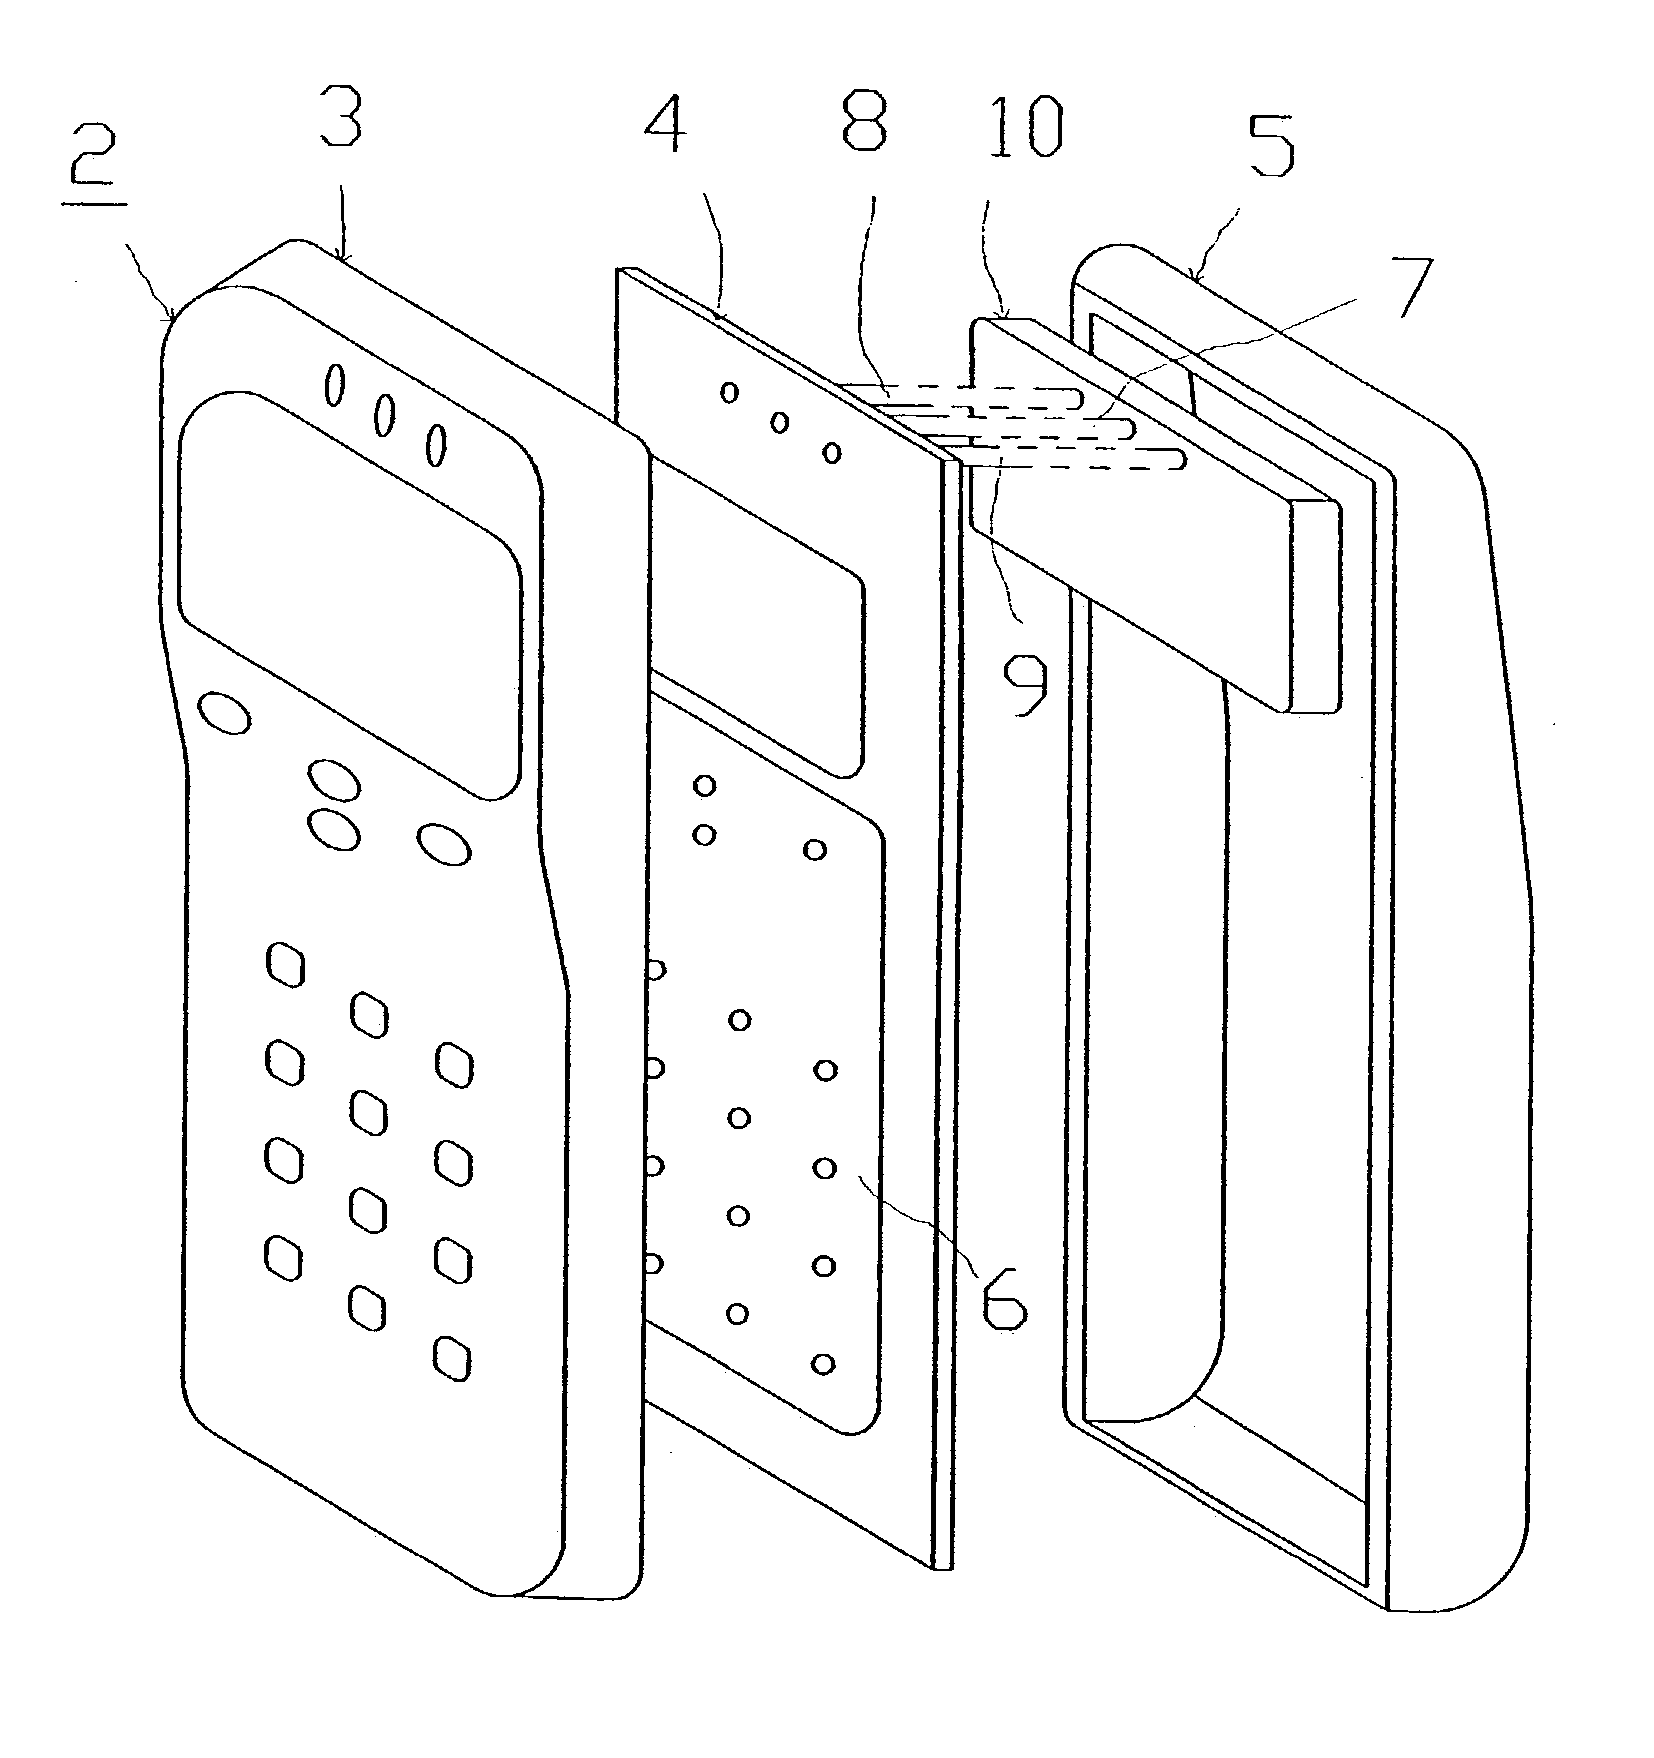 Apparatus and method for enhancing low-frequency operation of mobile communication antennas